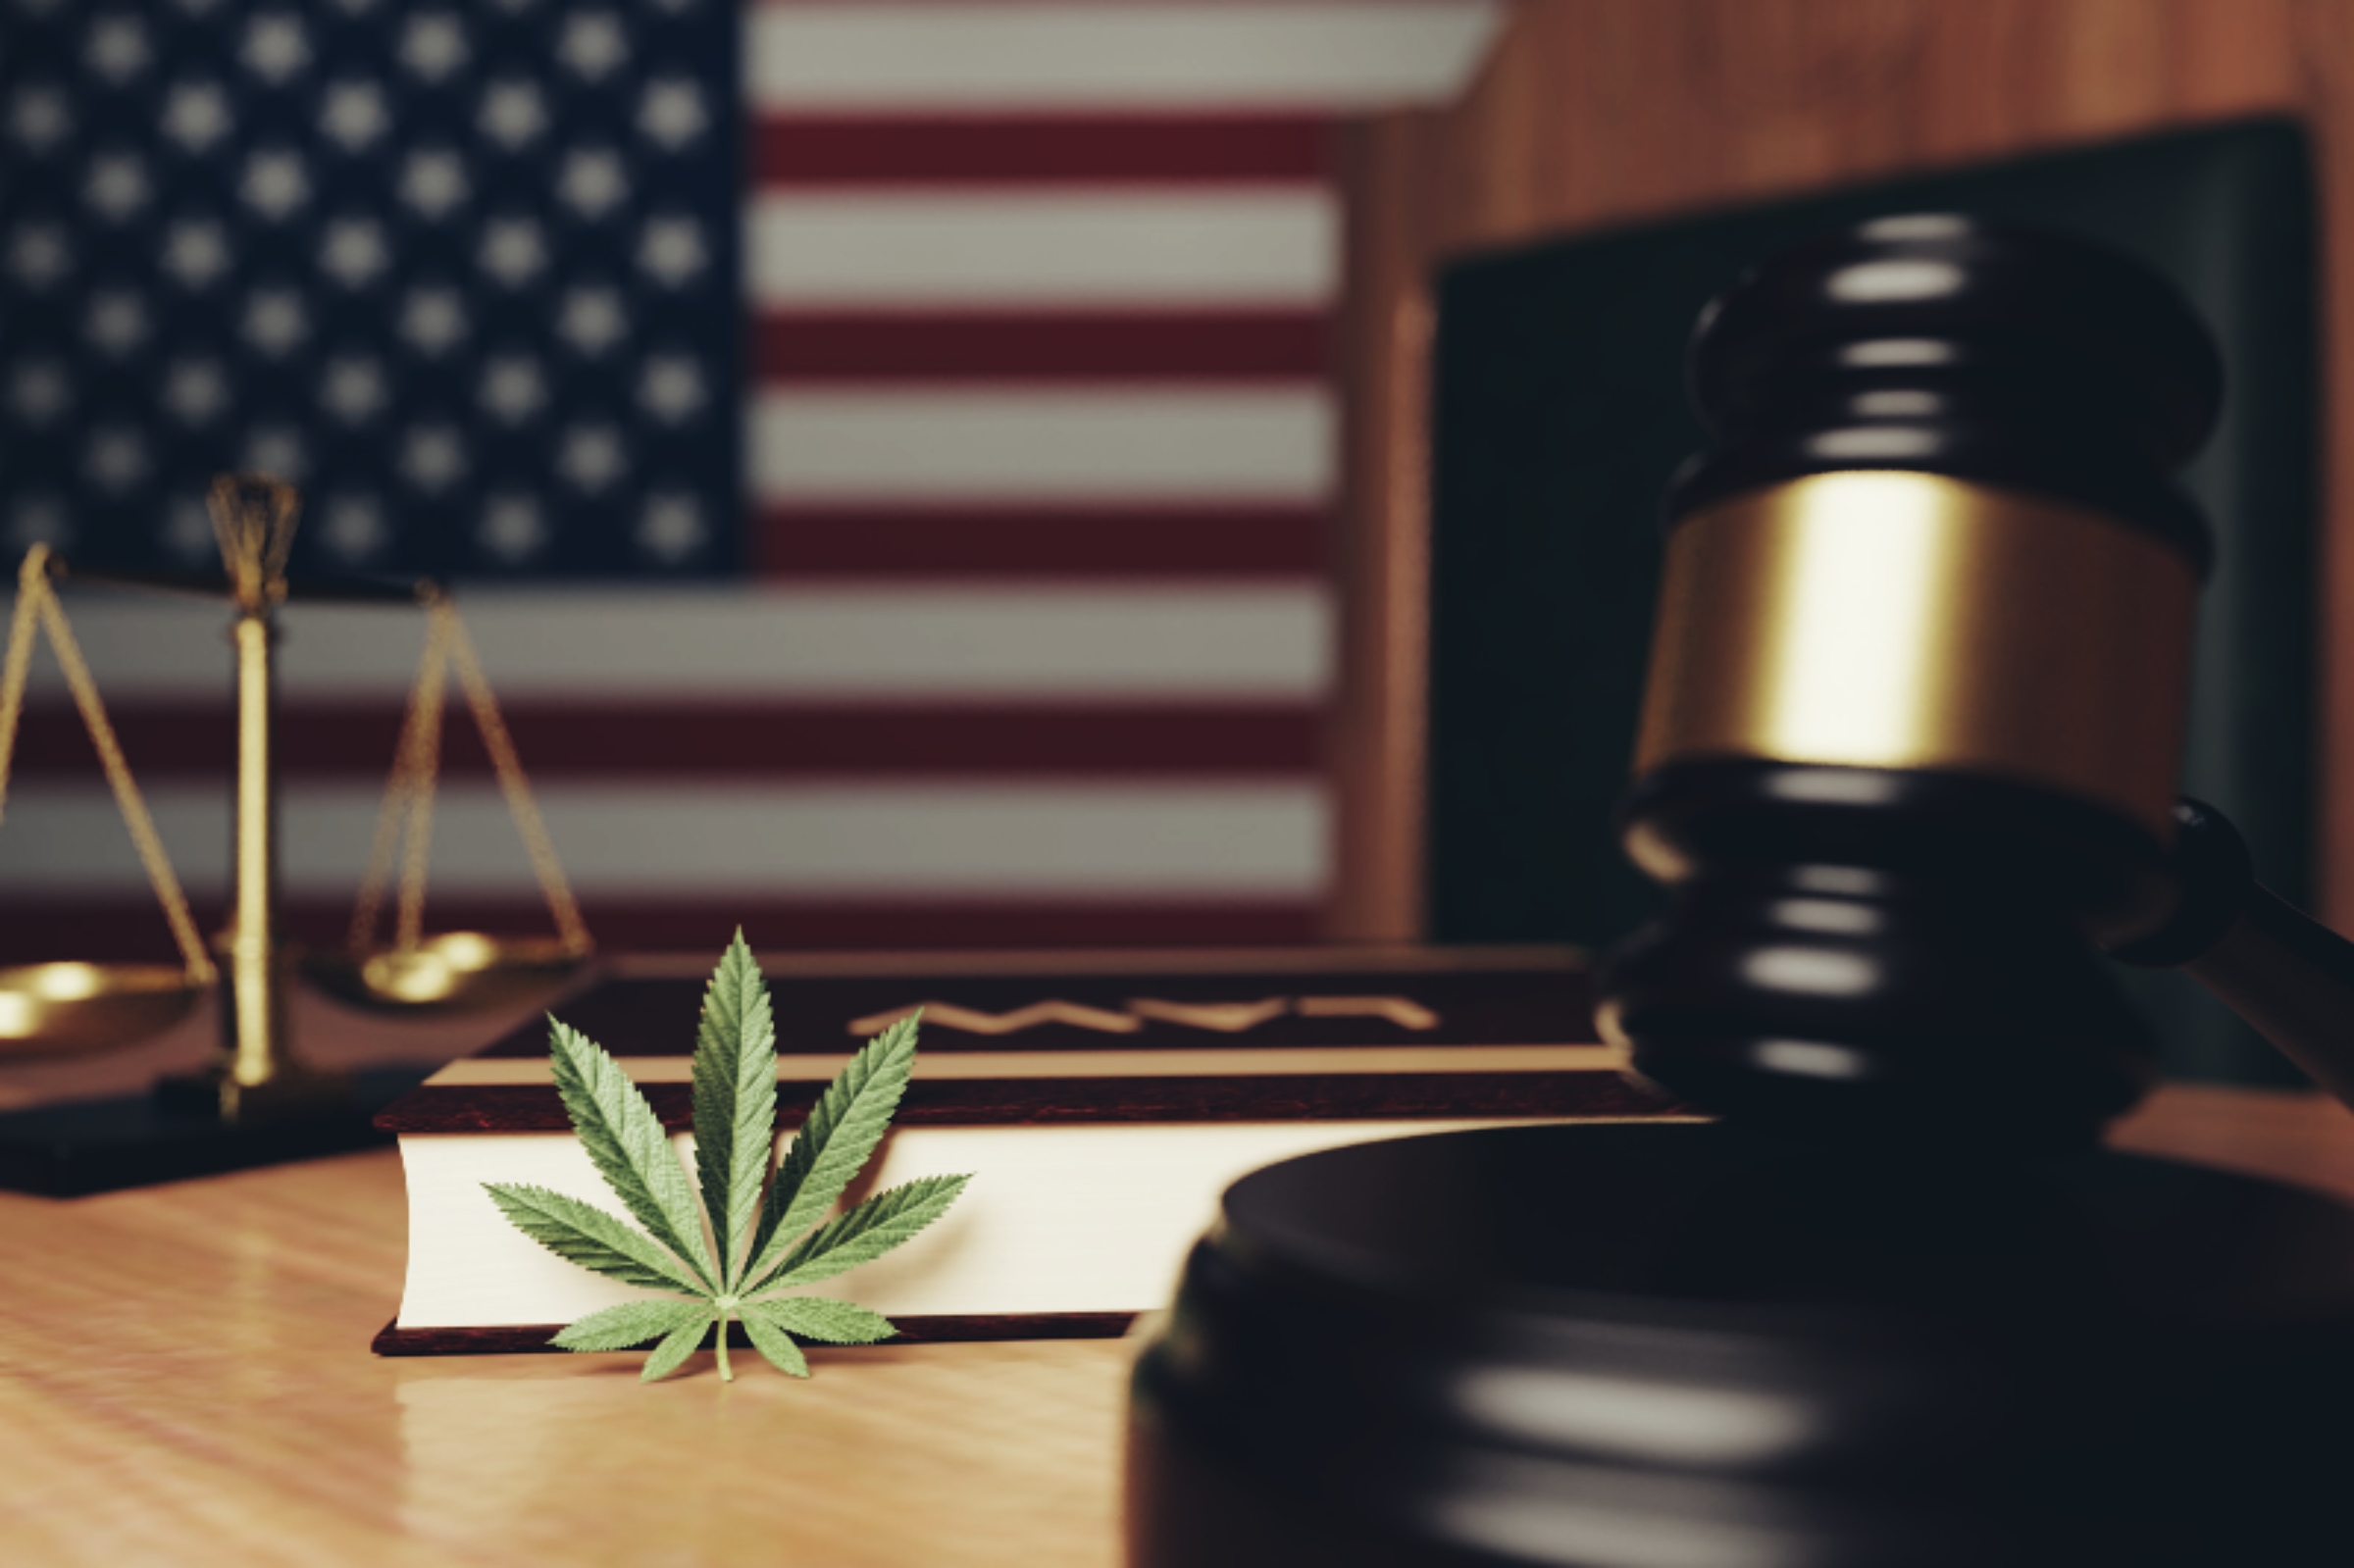 And now DOJ is trying to reverse court decision on guns and weed